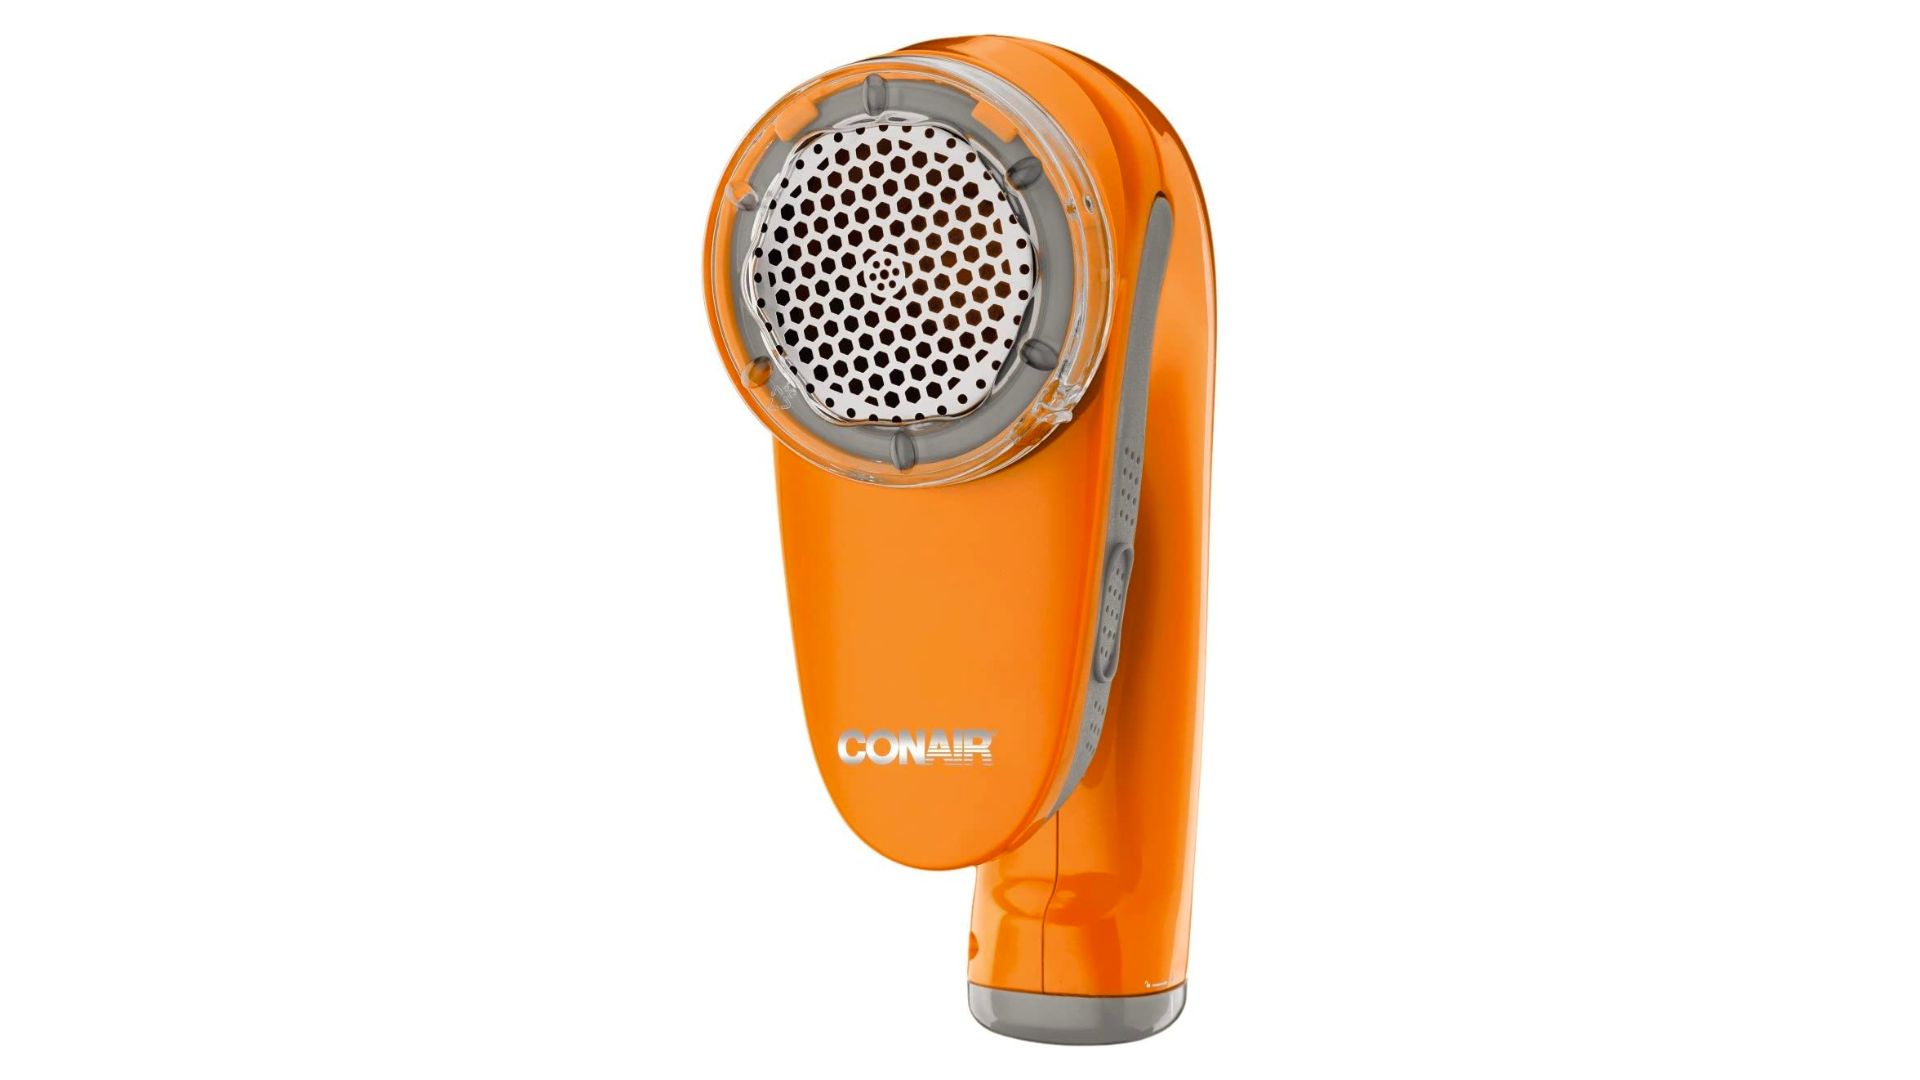 Conair fabric remover and lint shaver